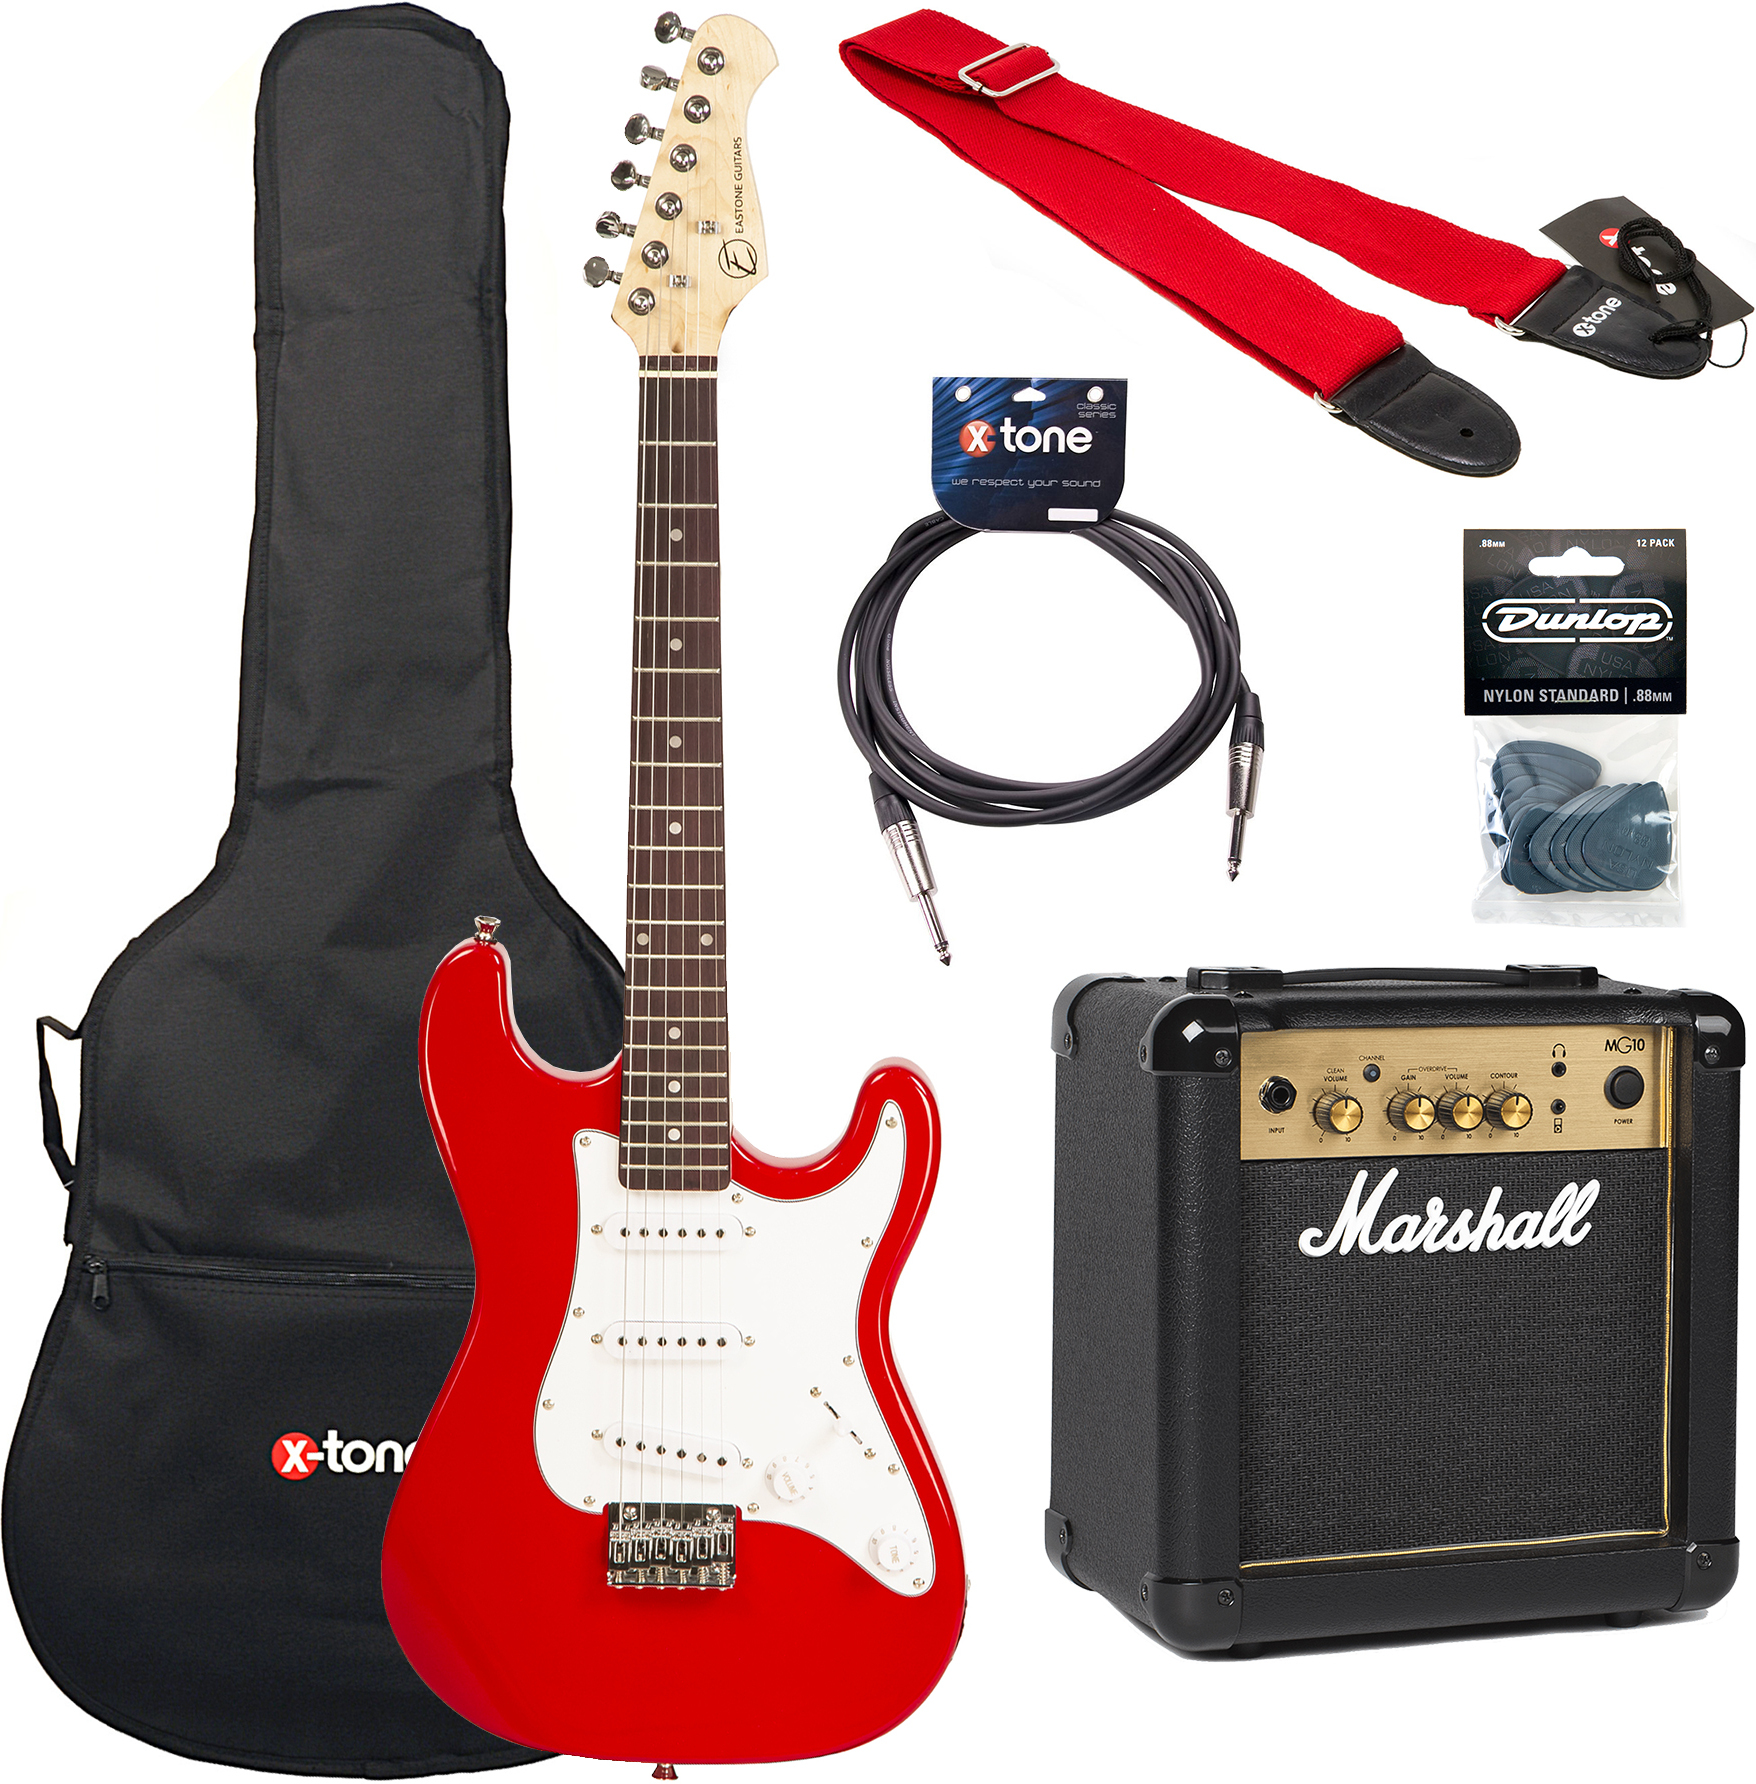 Eastone Str Mini +marshall Mg10g +cable +housse+ Courroie+ Mediators + Mg10g Gold Combo 10 W - Red - Packs guitarra eléctrica - Main picture